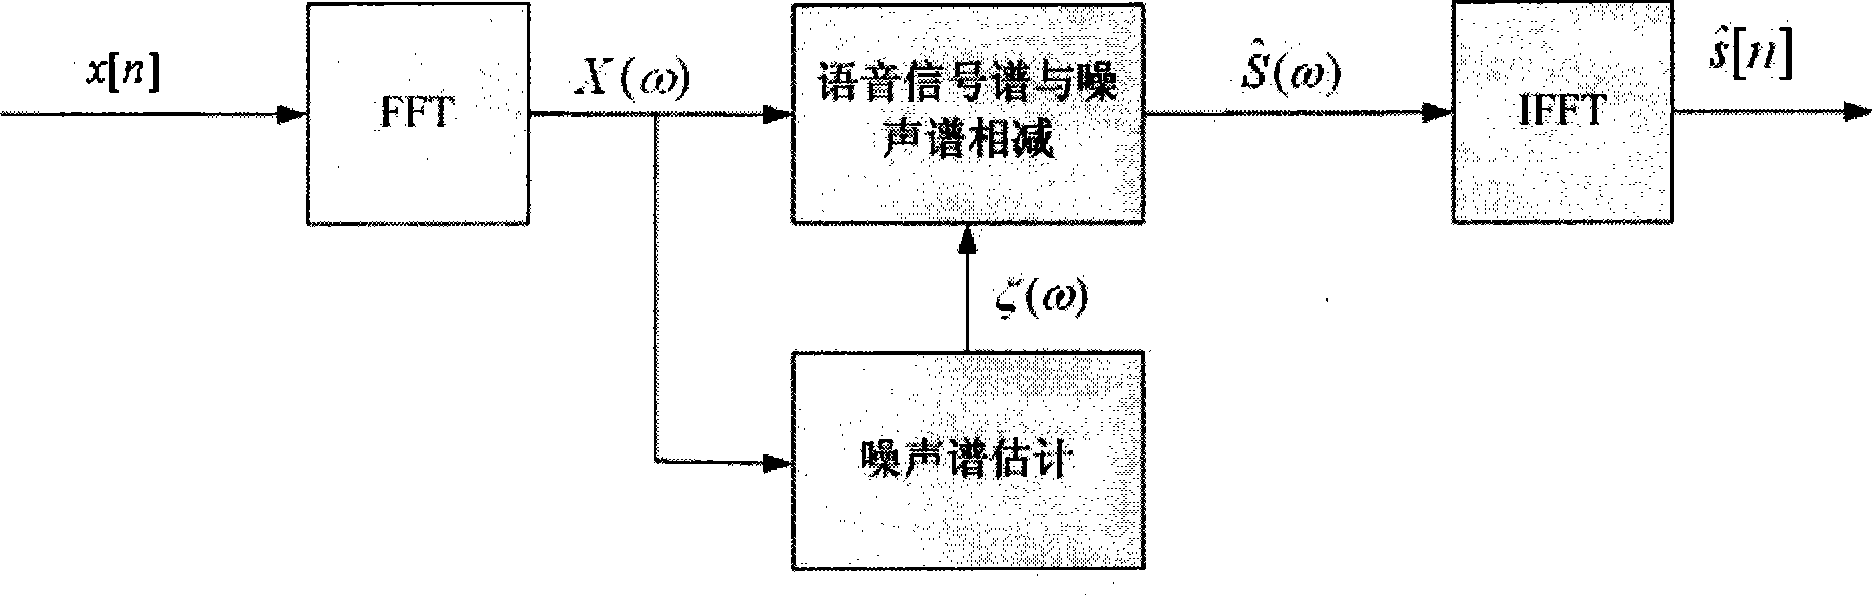 Voice enhancement method employing combination of nesting-subarray-based post filtering and spectrum-subtraction